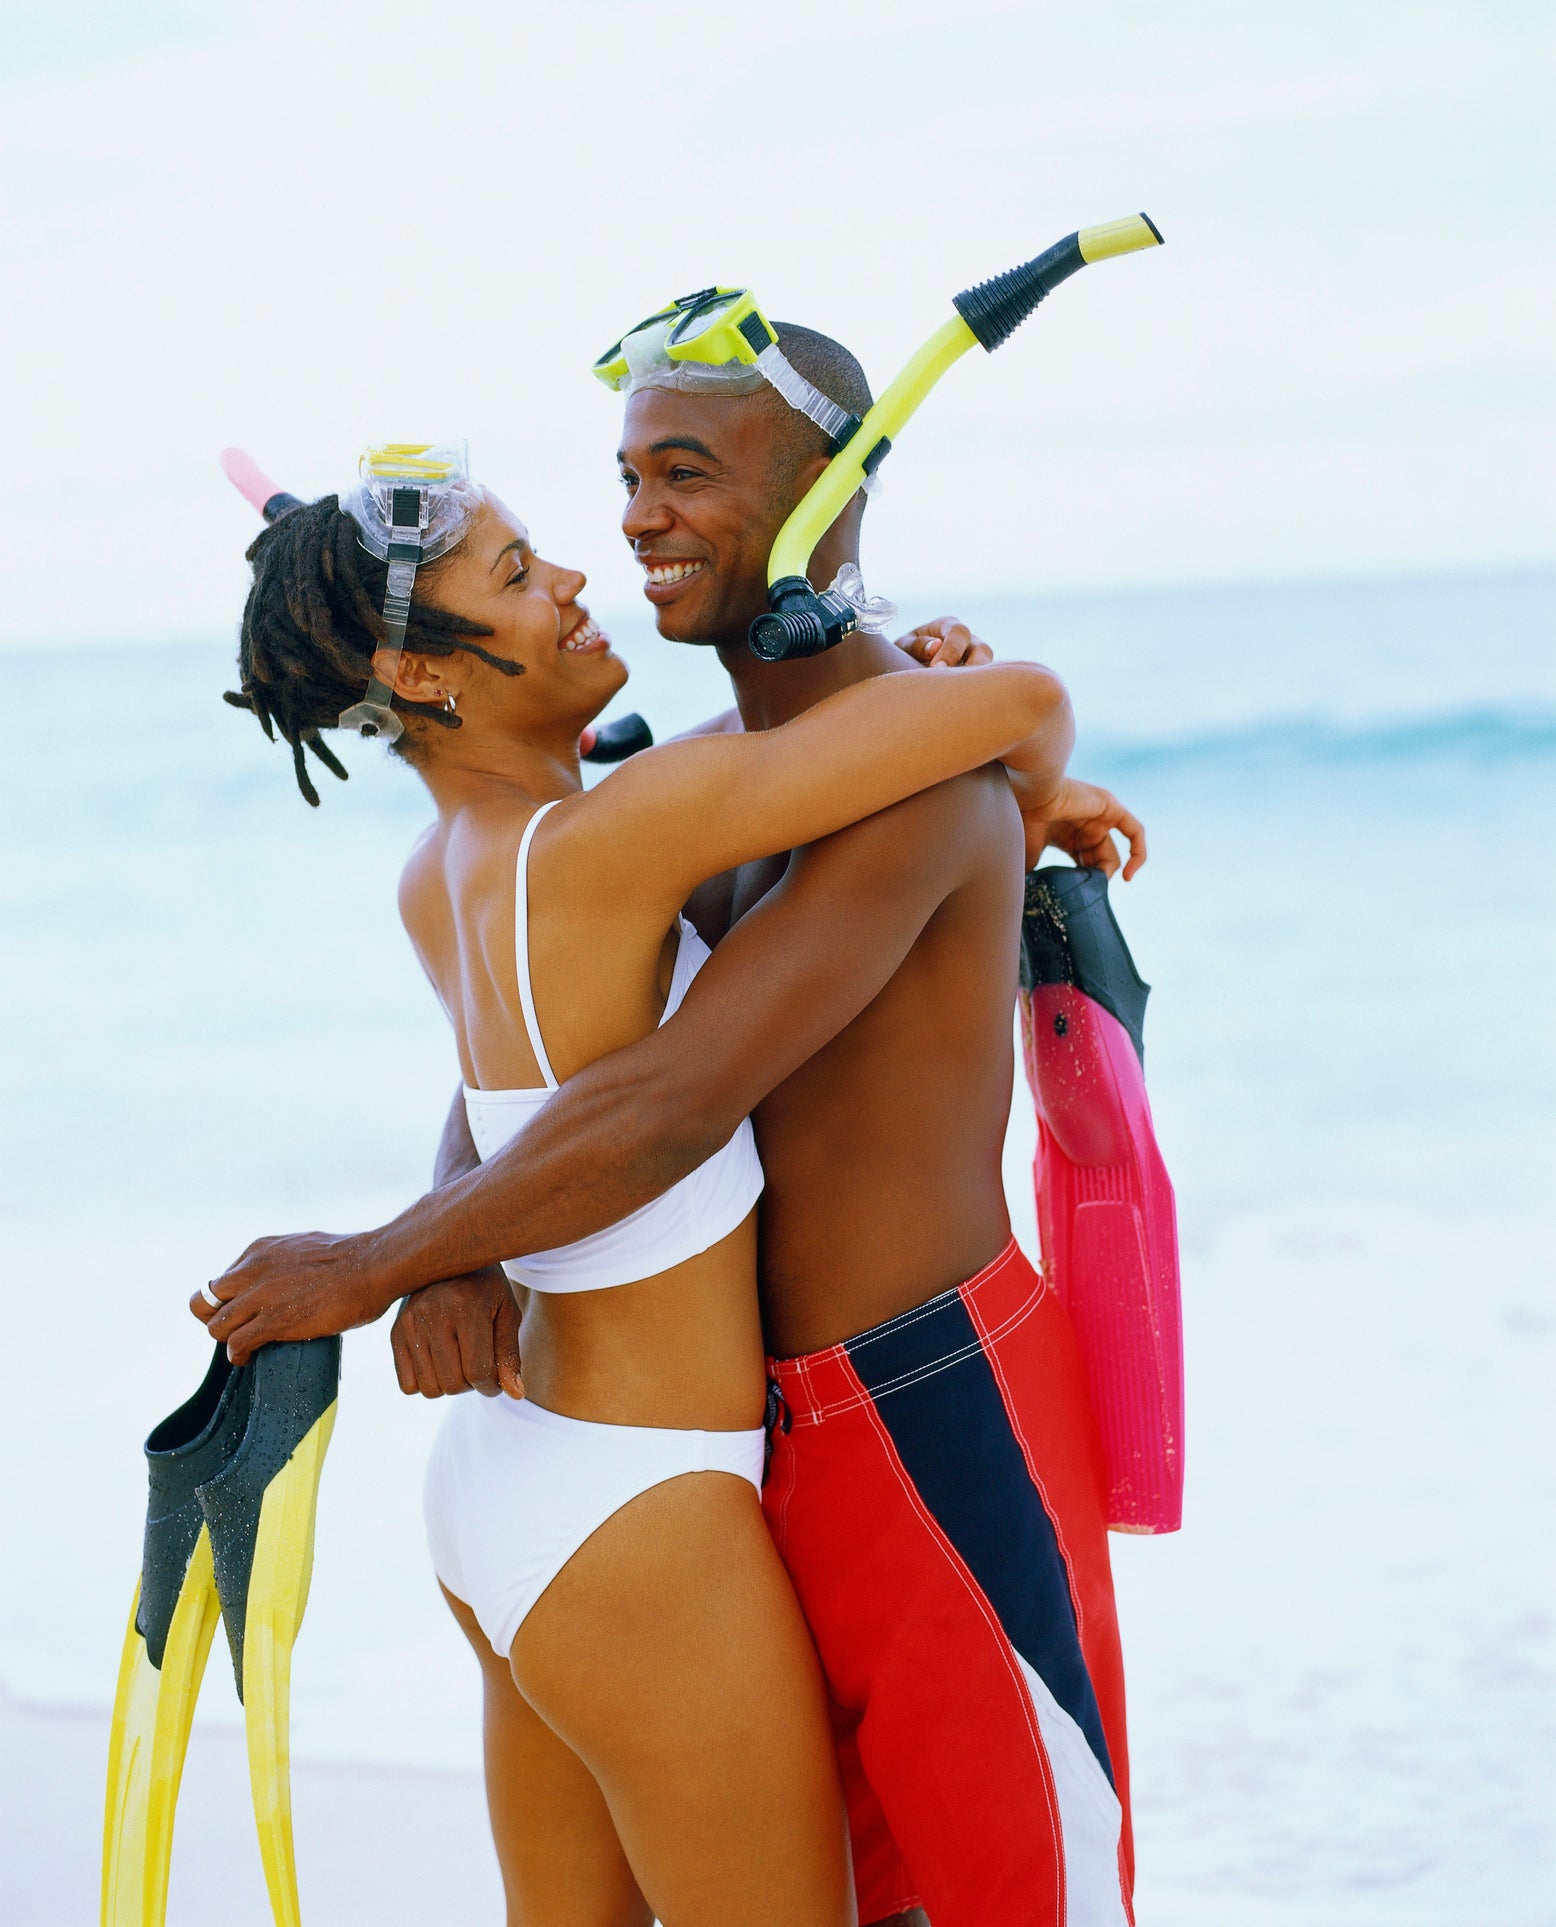 If You're Traveling With Your Partner Soon, Here Are 6 Tips For Smooth Sailing